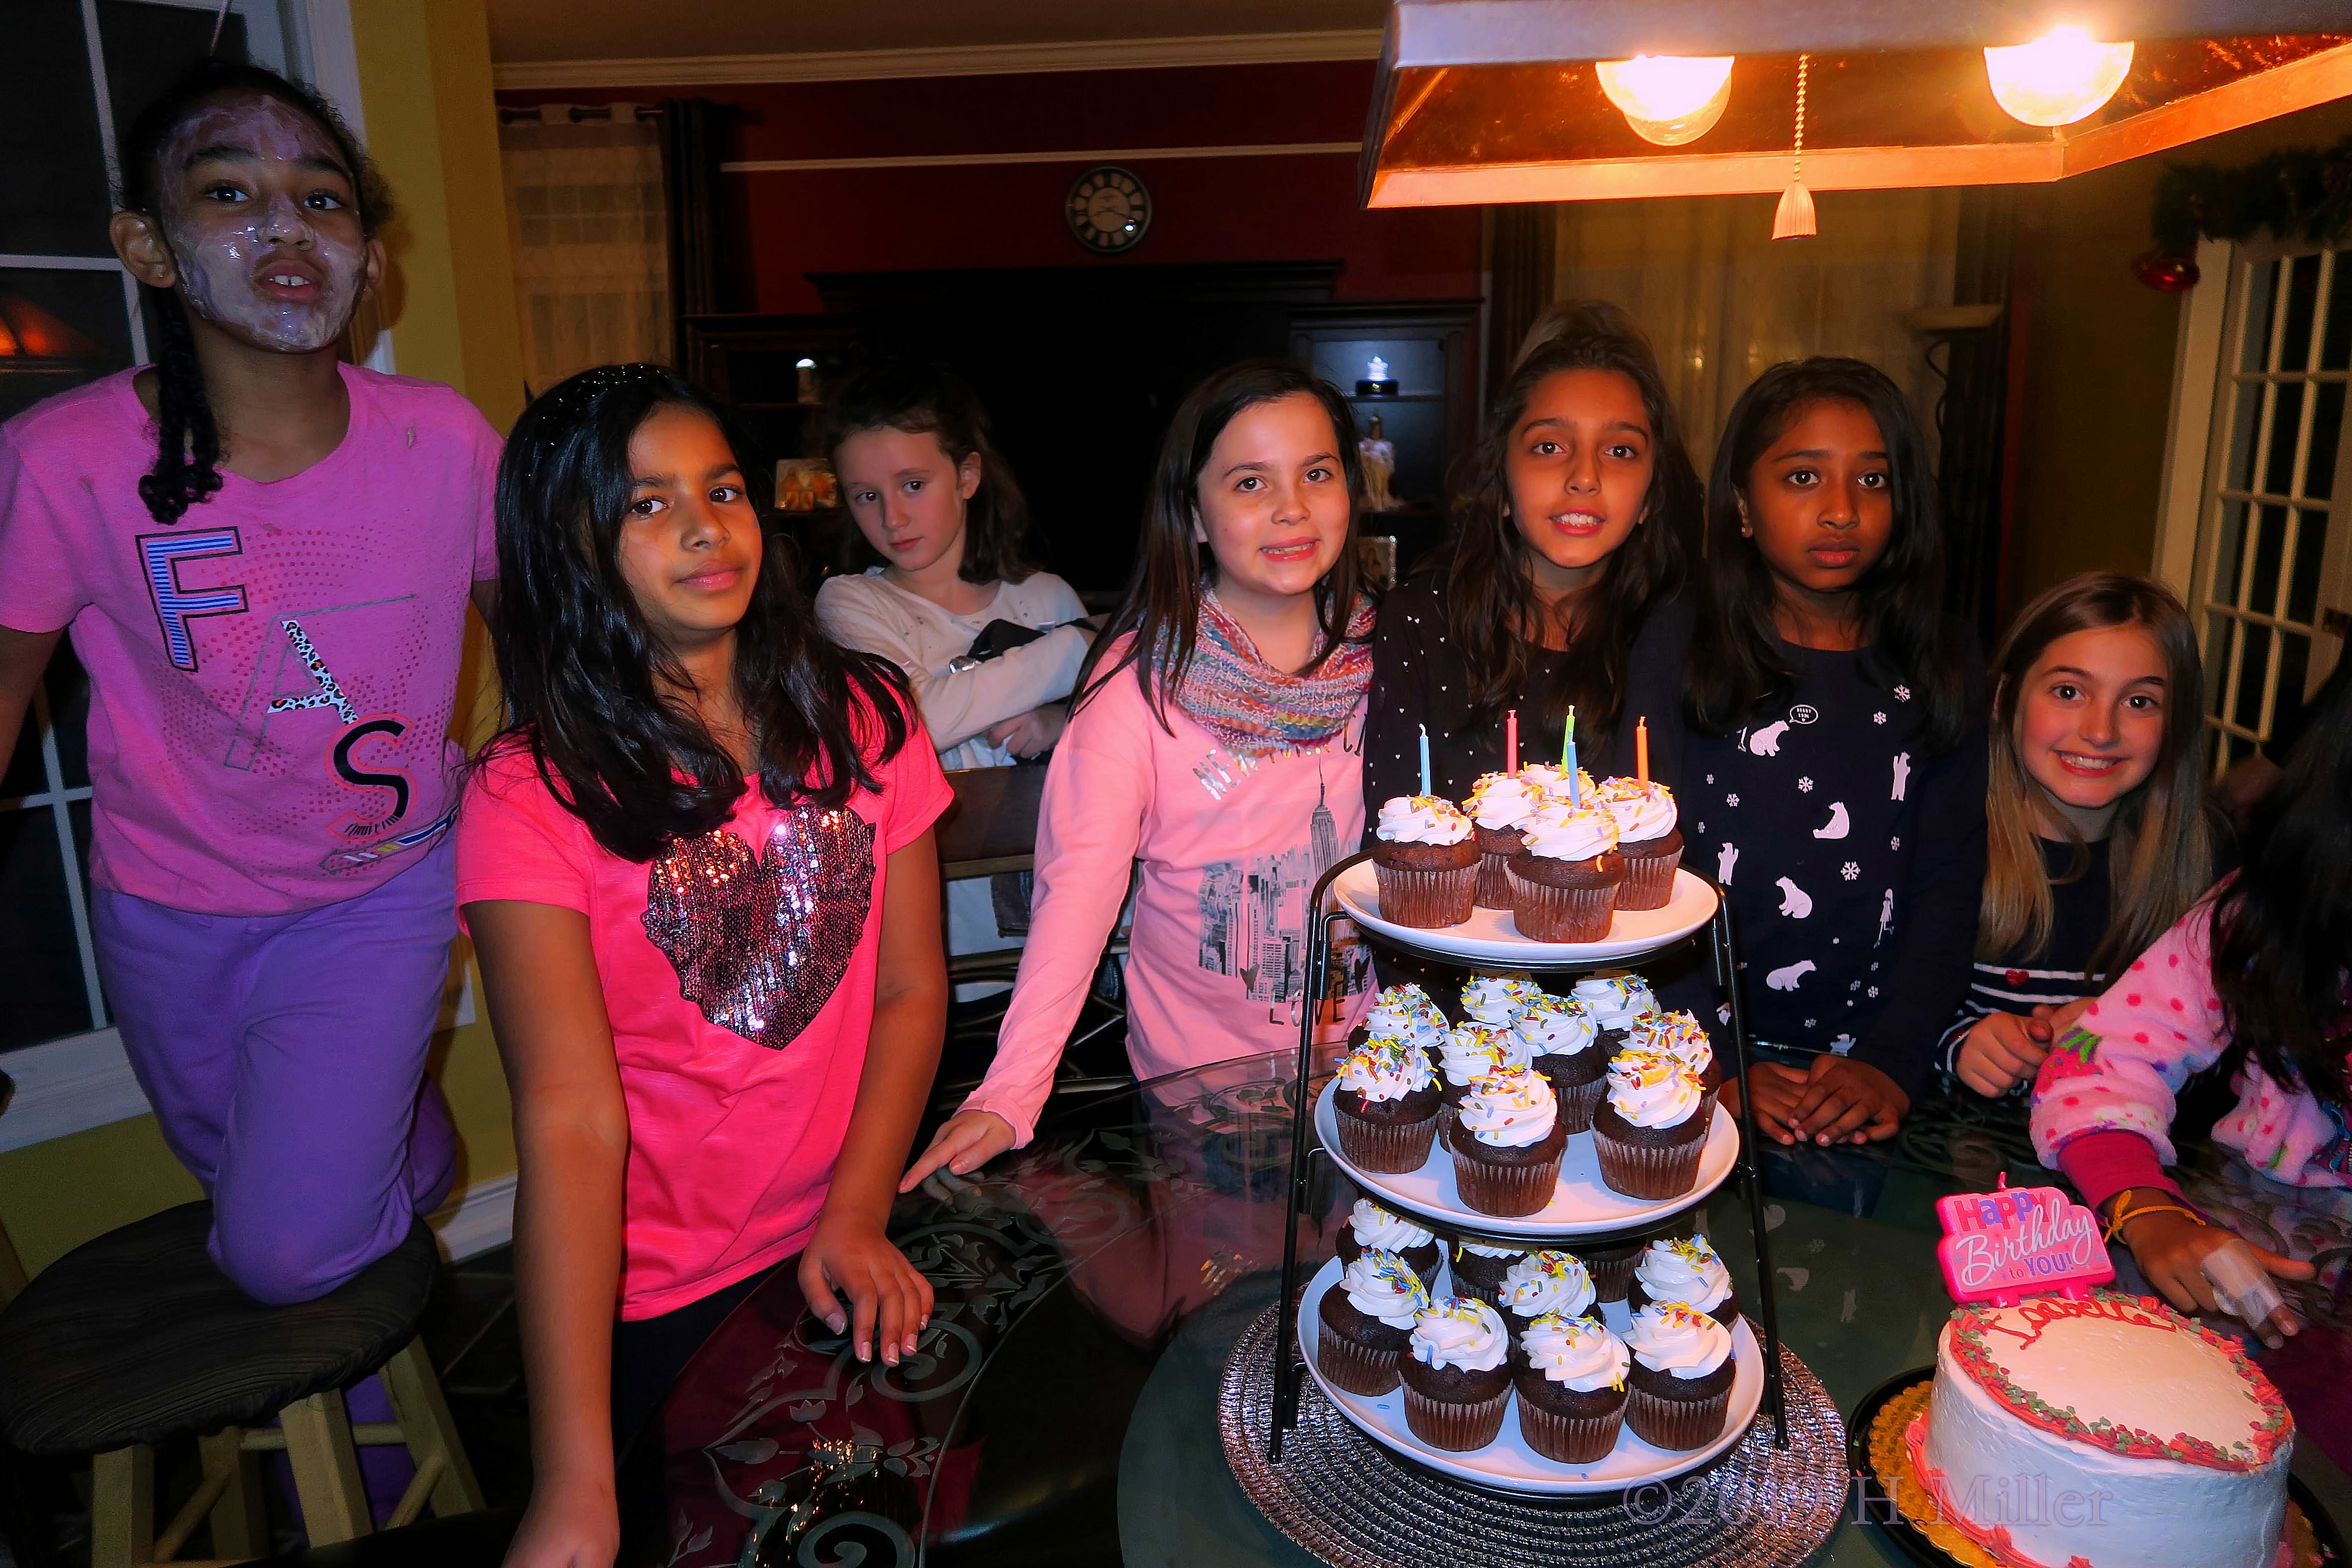 Girls Are Posing With The Cupcakes And Birthday Cake With Big Smiles At The Spa Birthday Party 